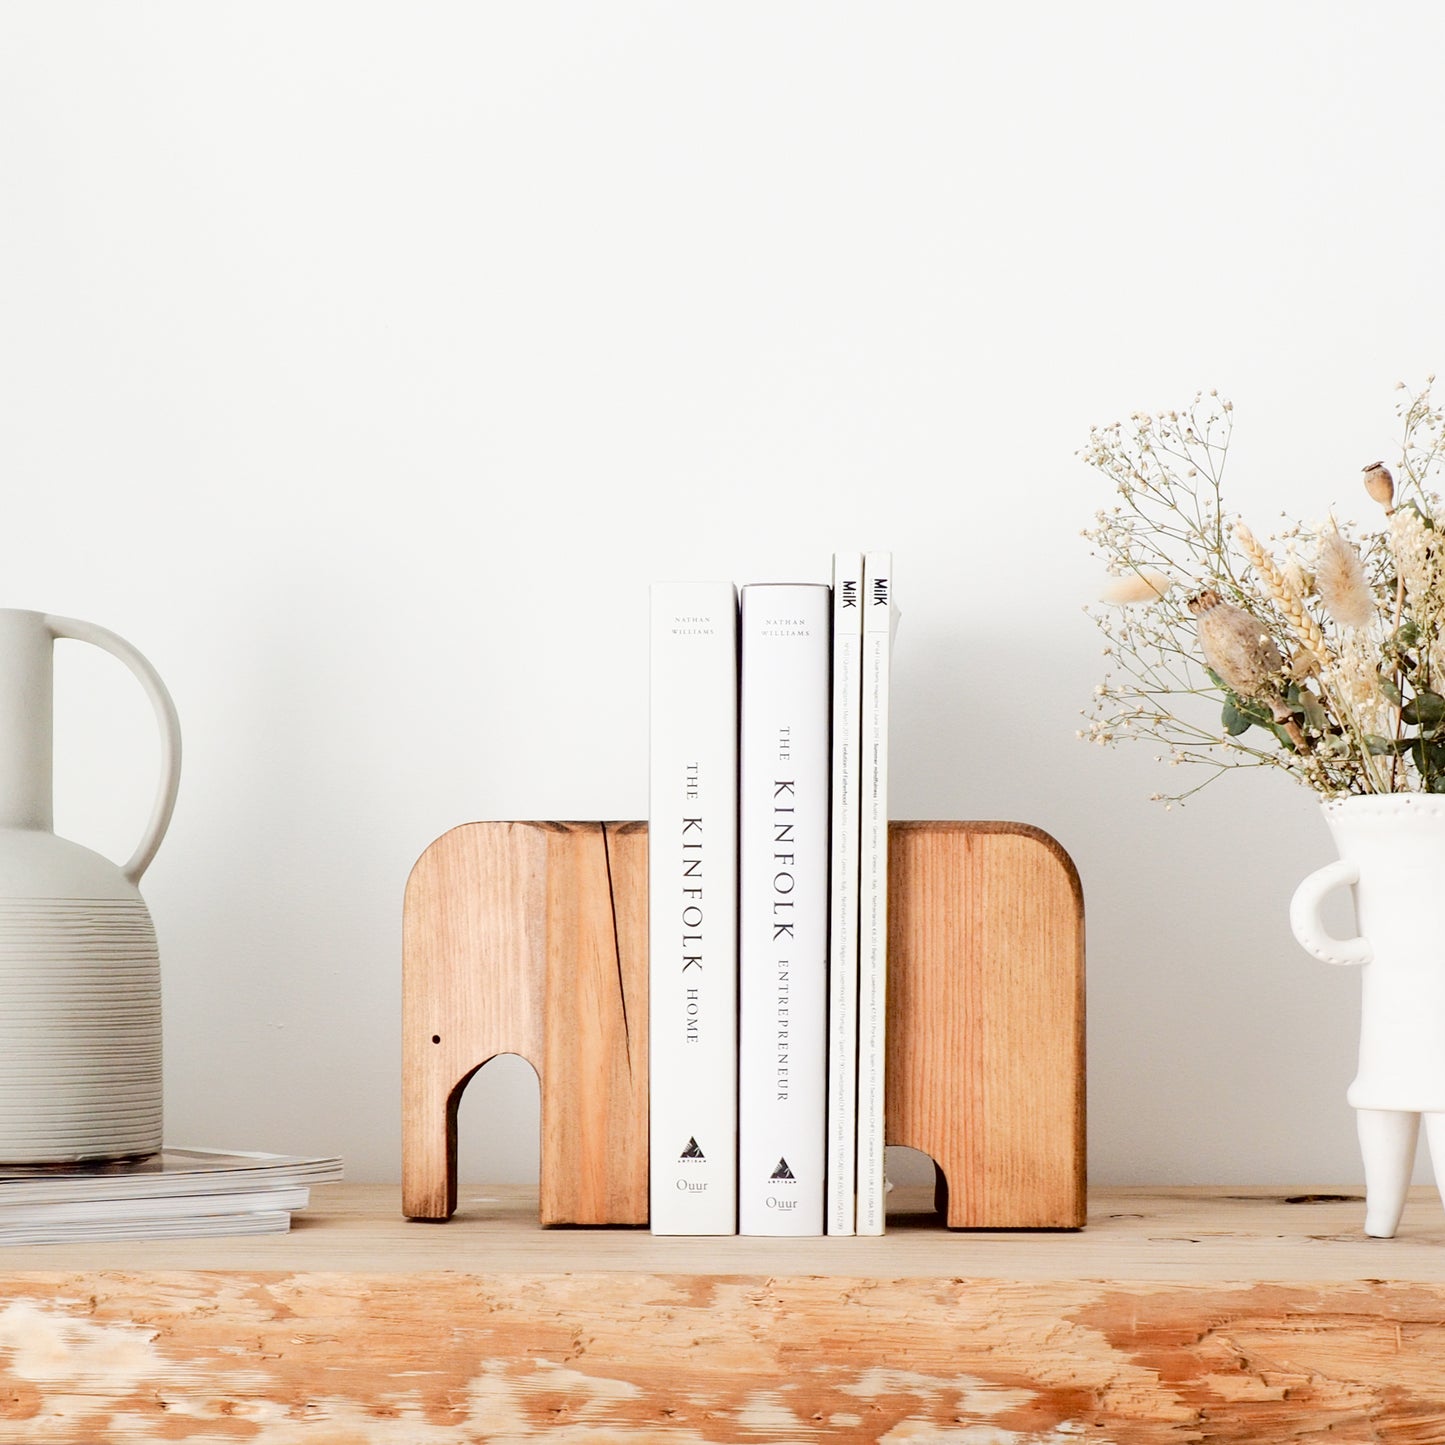 "The elephant in the room" | Bookend